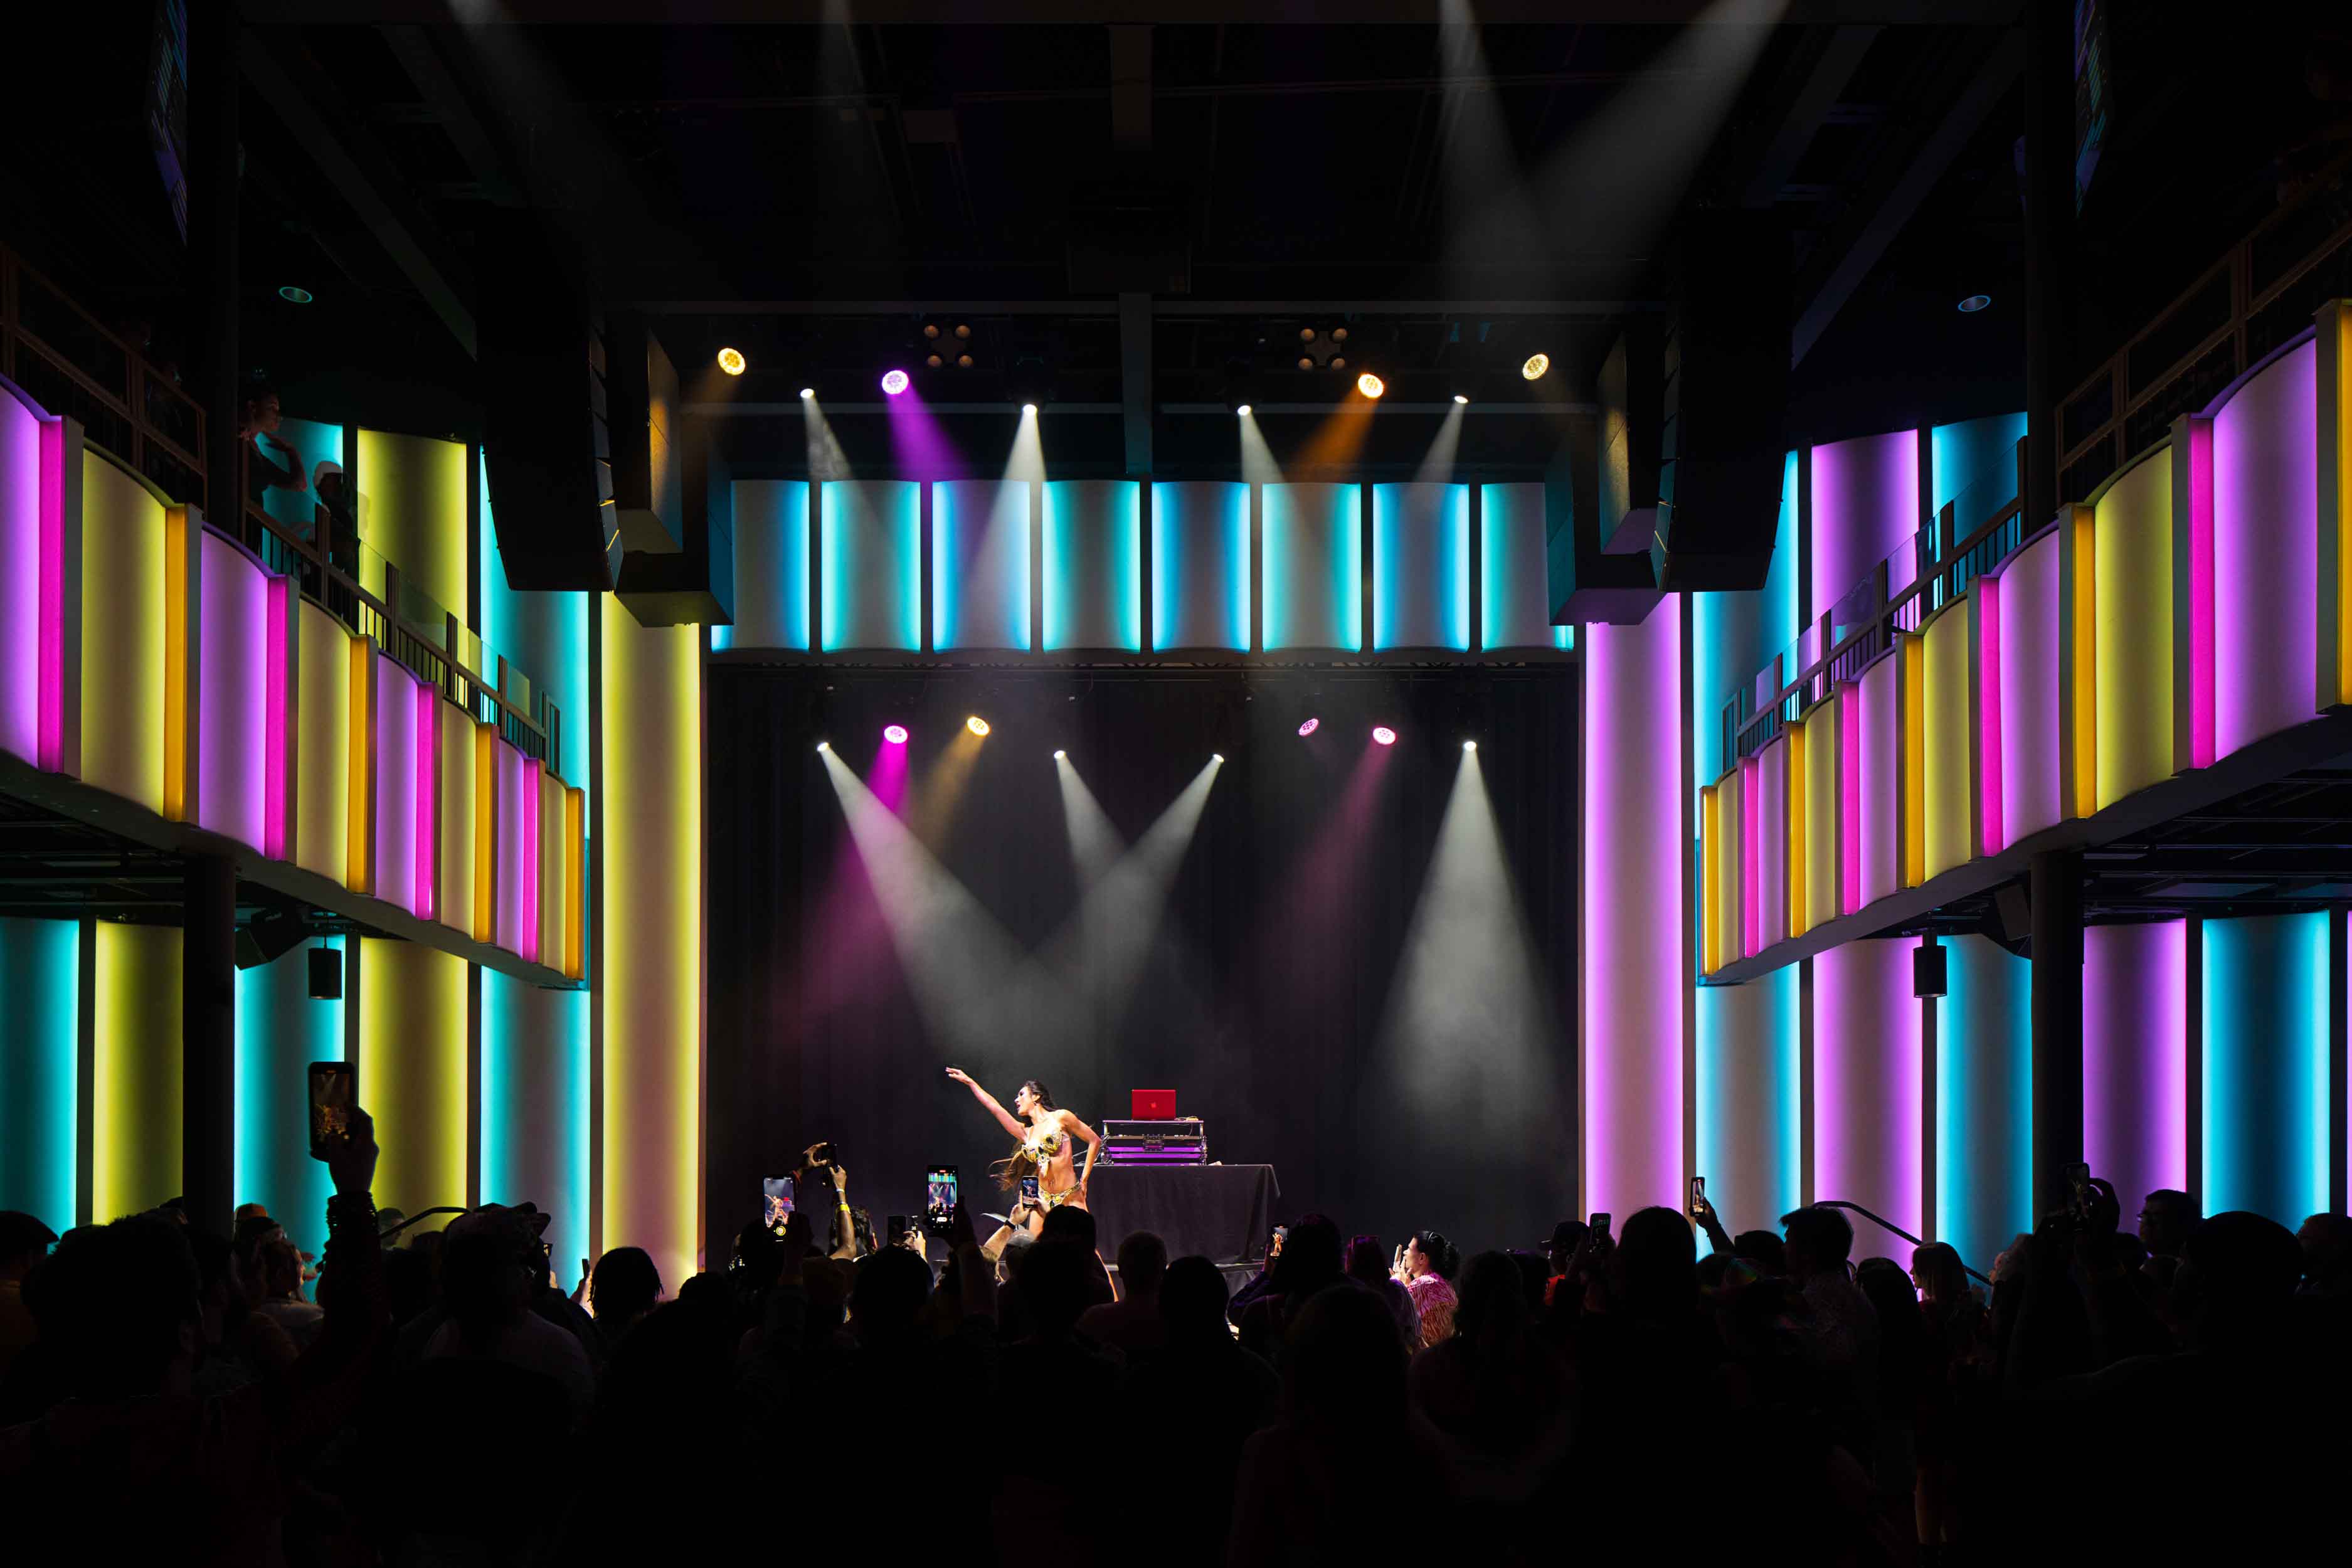 Performance stage at the Music Hall with neon lighting surrounding the stage